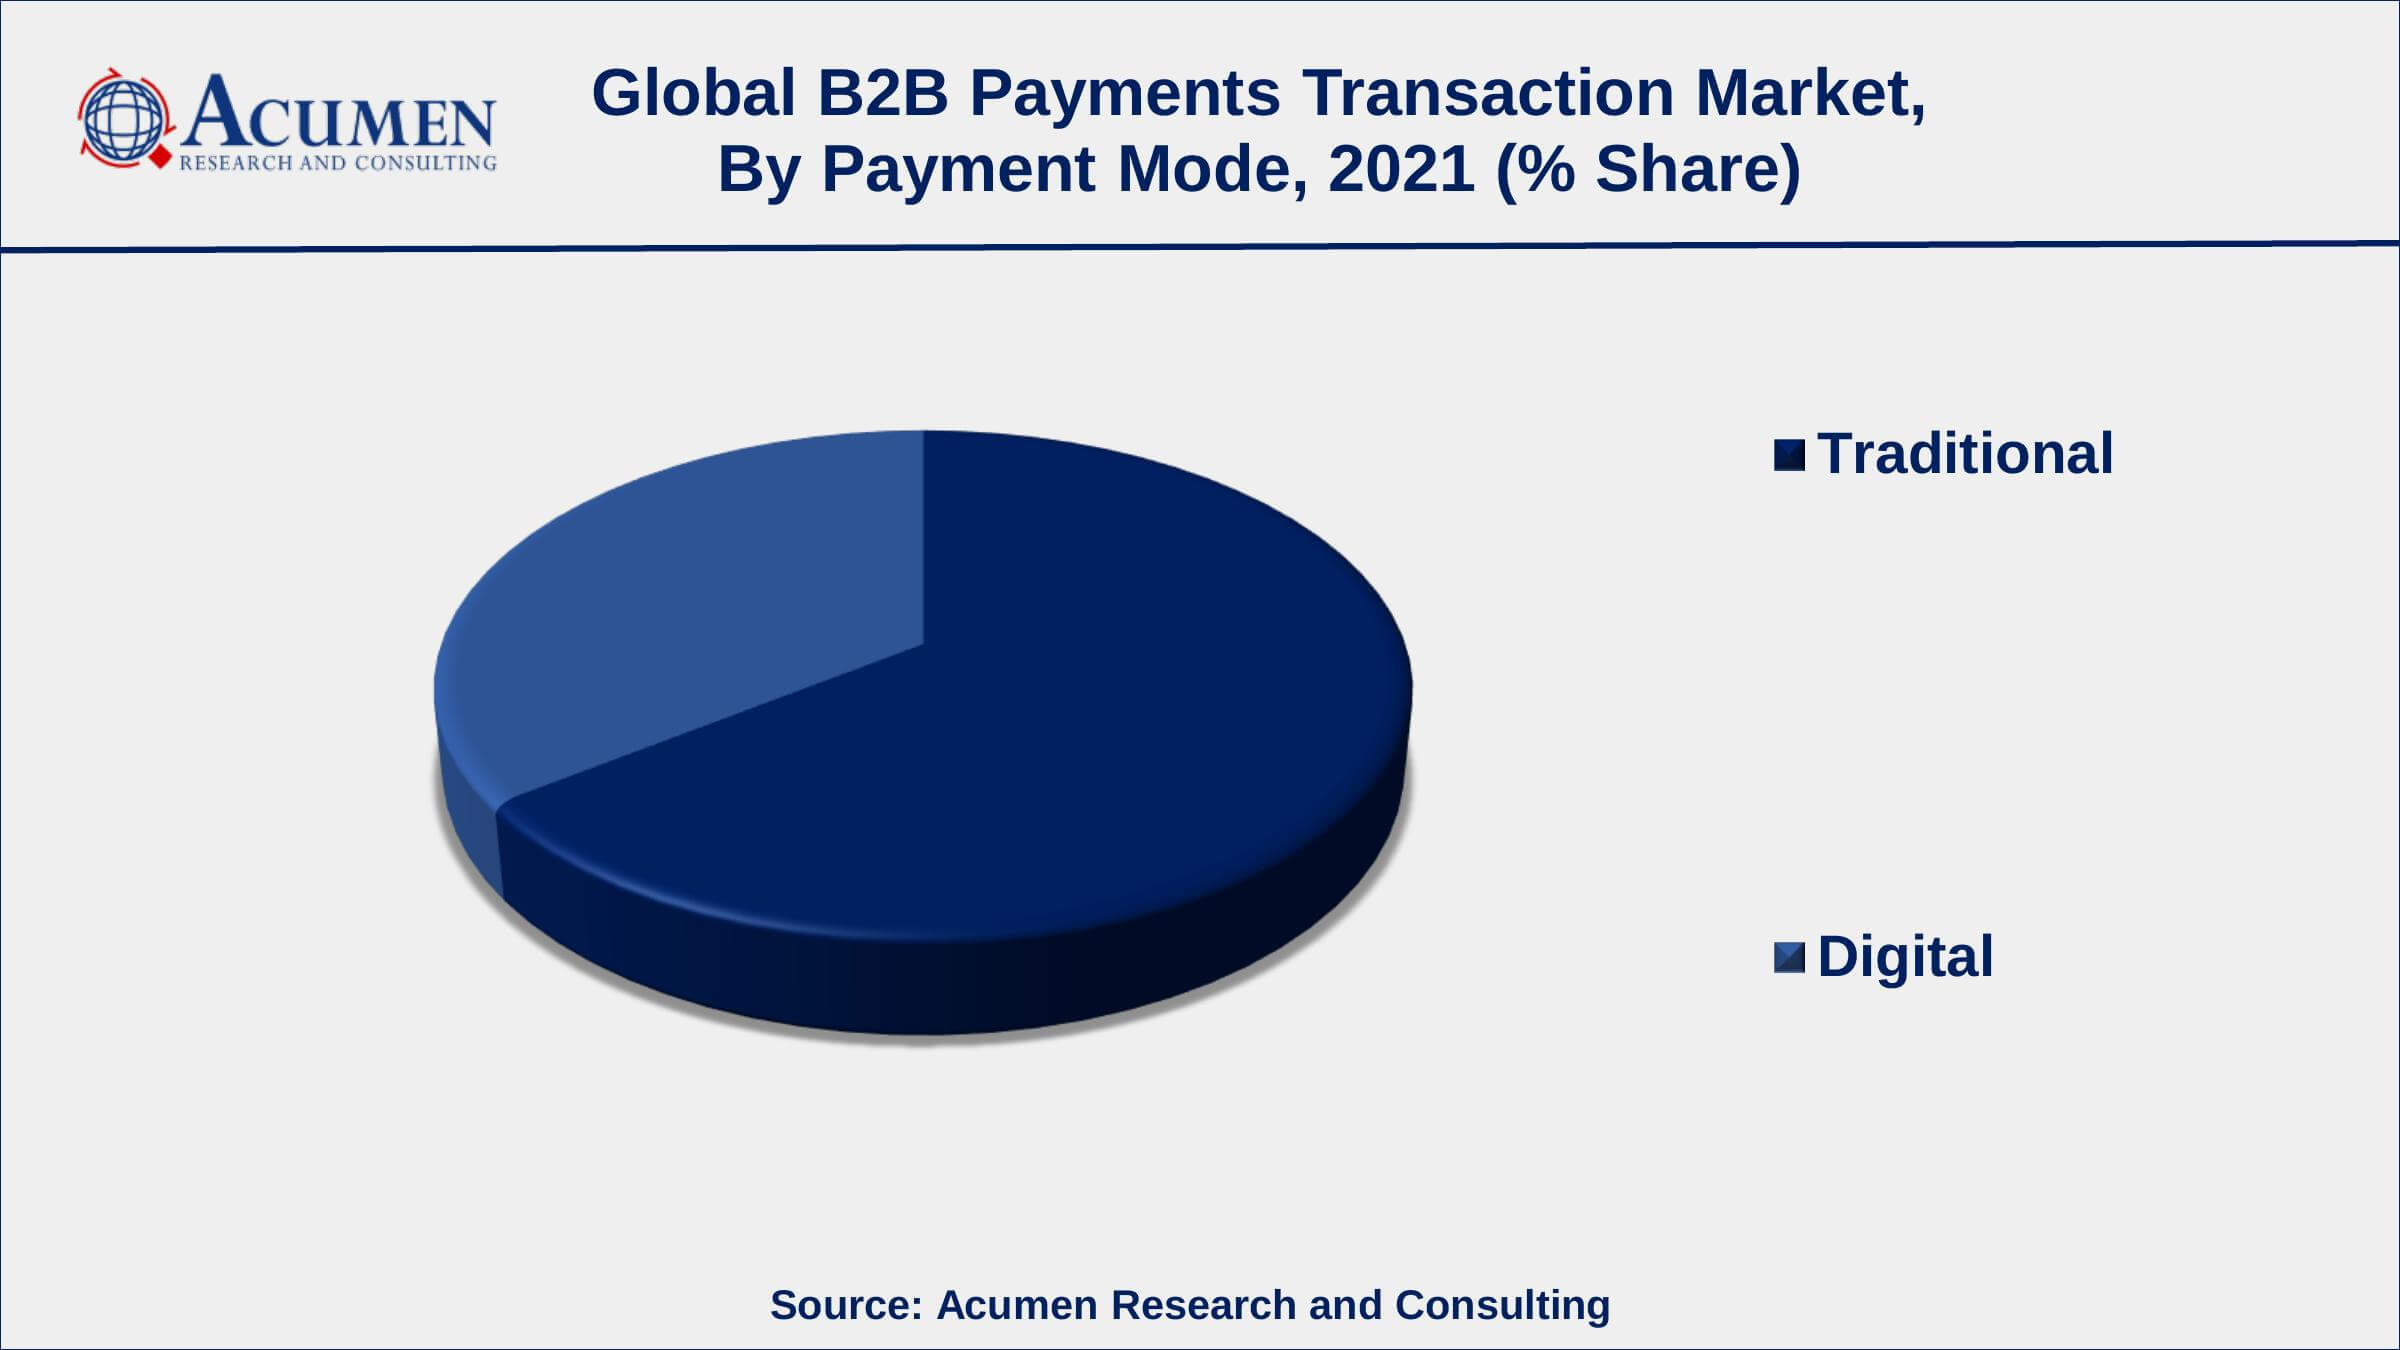 Among payment mode, traditional sub-segment occupied more than 65% of the market share from 2022 to 2030